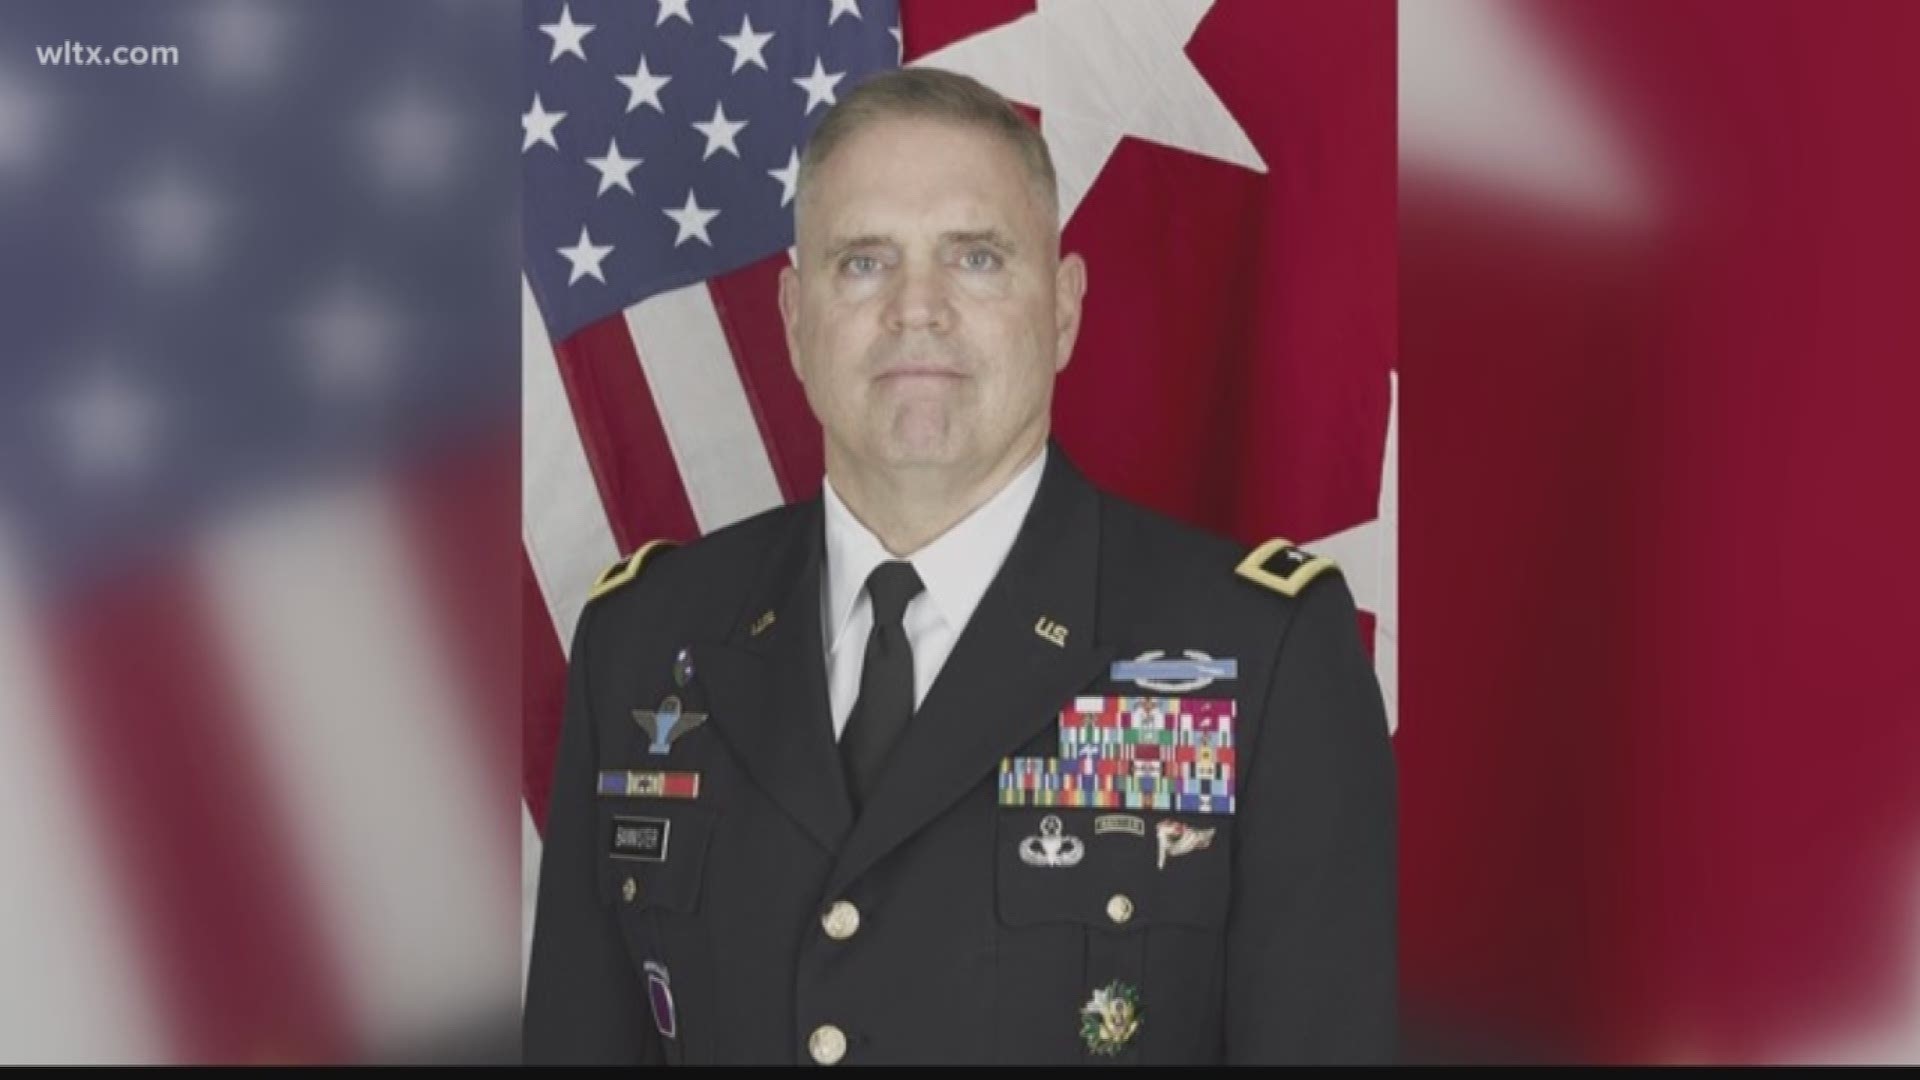 The U.S. Army said Major General Jeffrey L. Bannister died at Lake Murray on Sunday while he was on transition leave